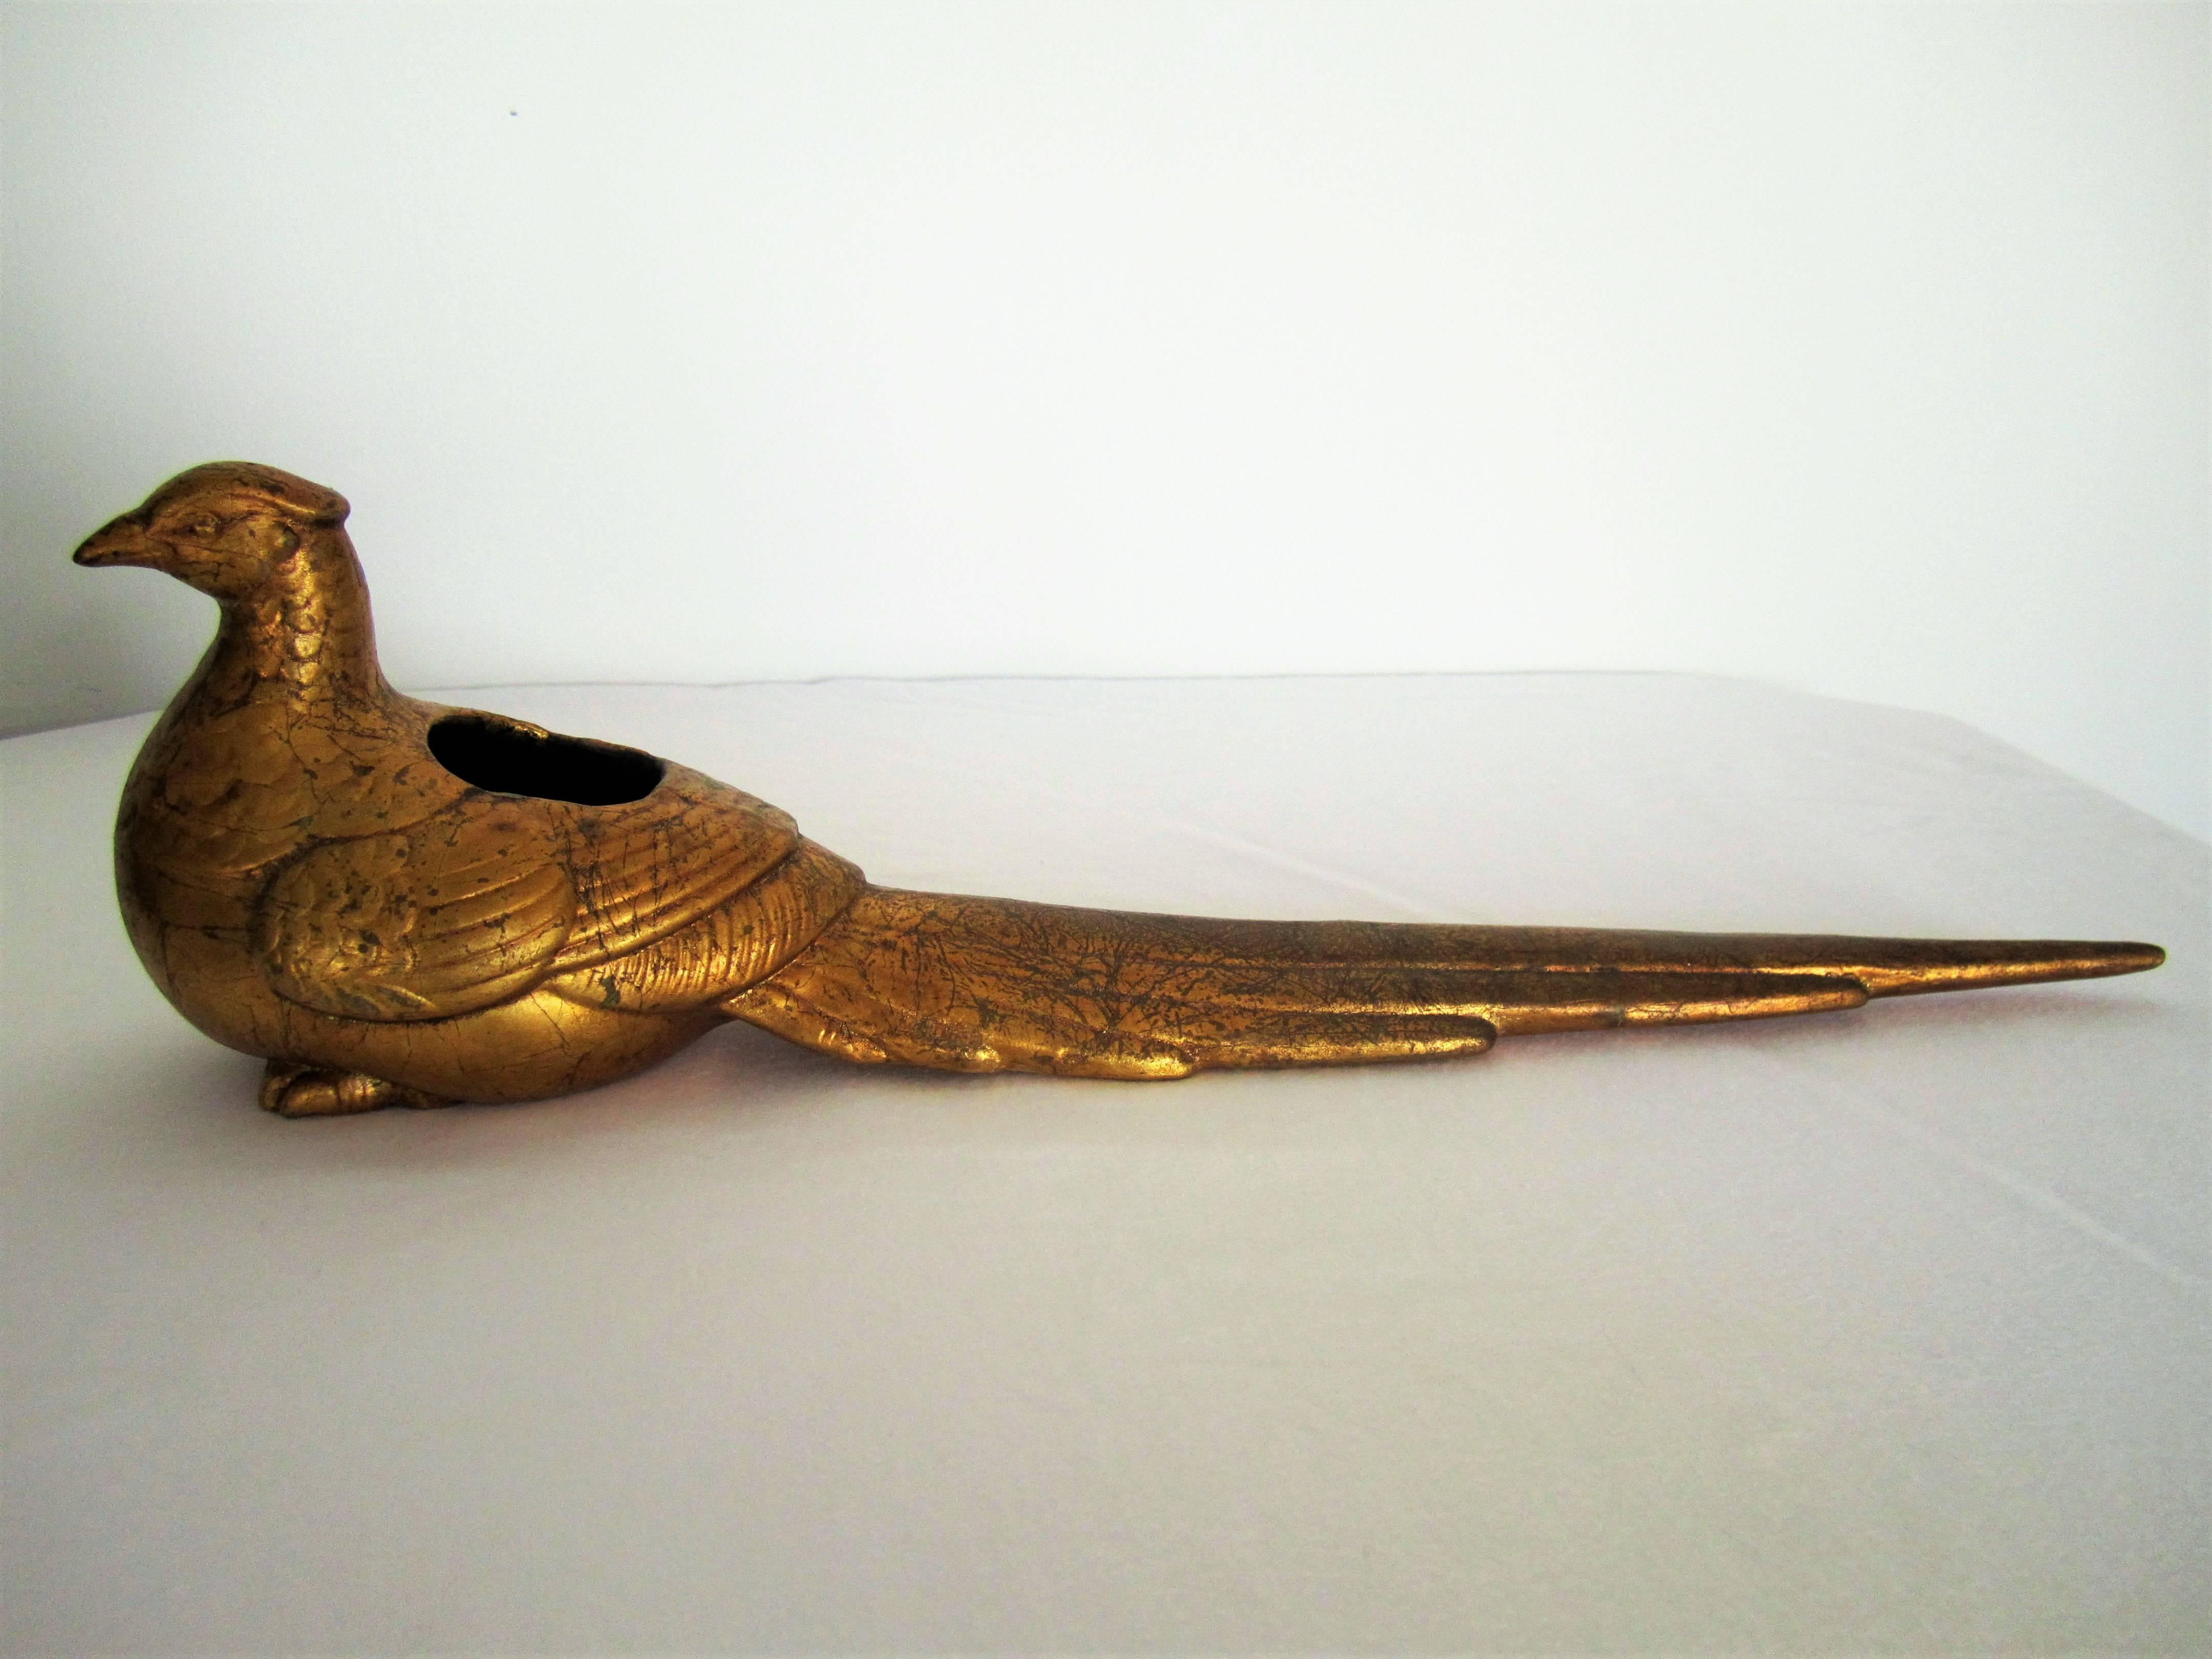 A substantial, beautiful, and long gilt ceramic Pheasant bird decorative piece in the Art Deco style. Circa 1970s. Measures 14